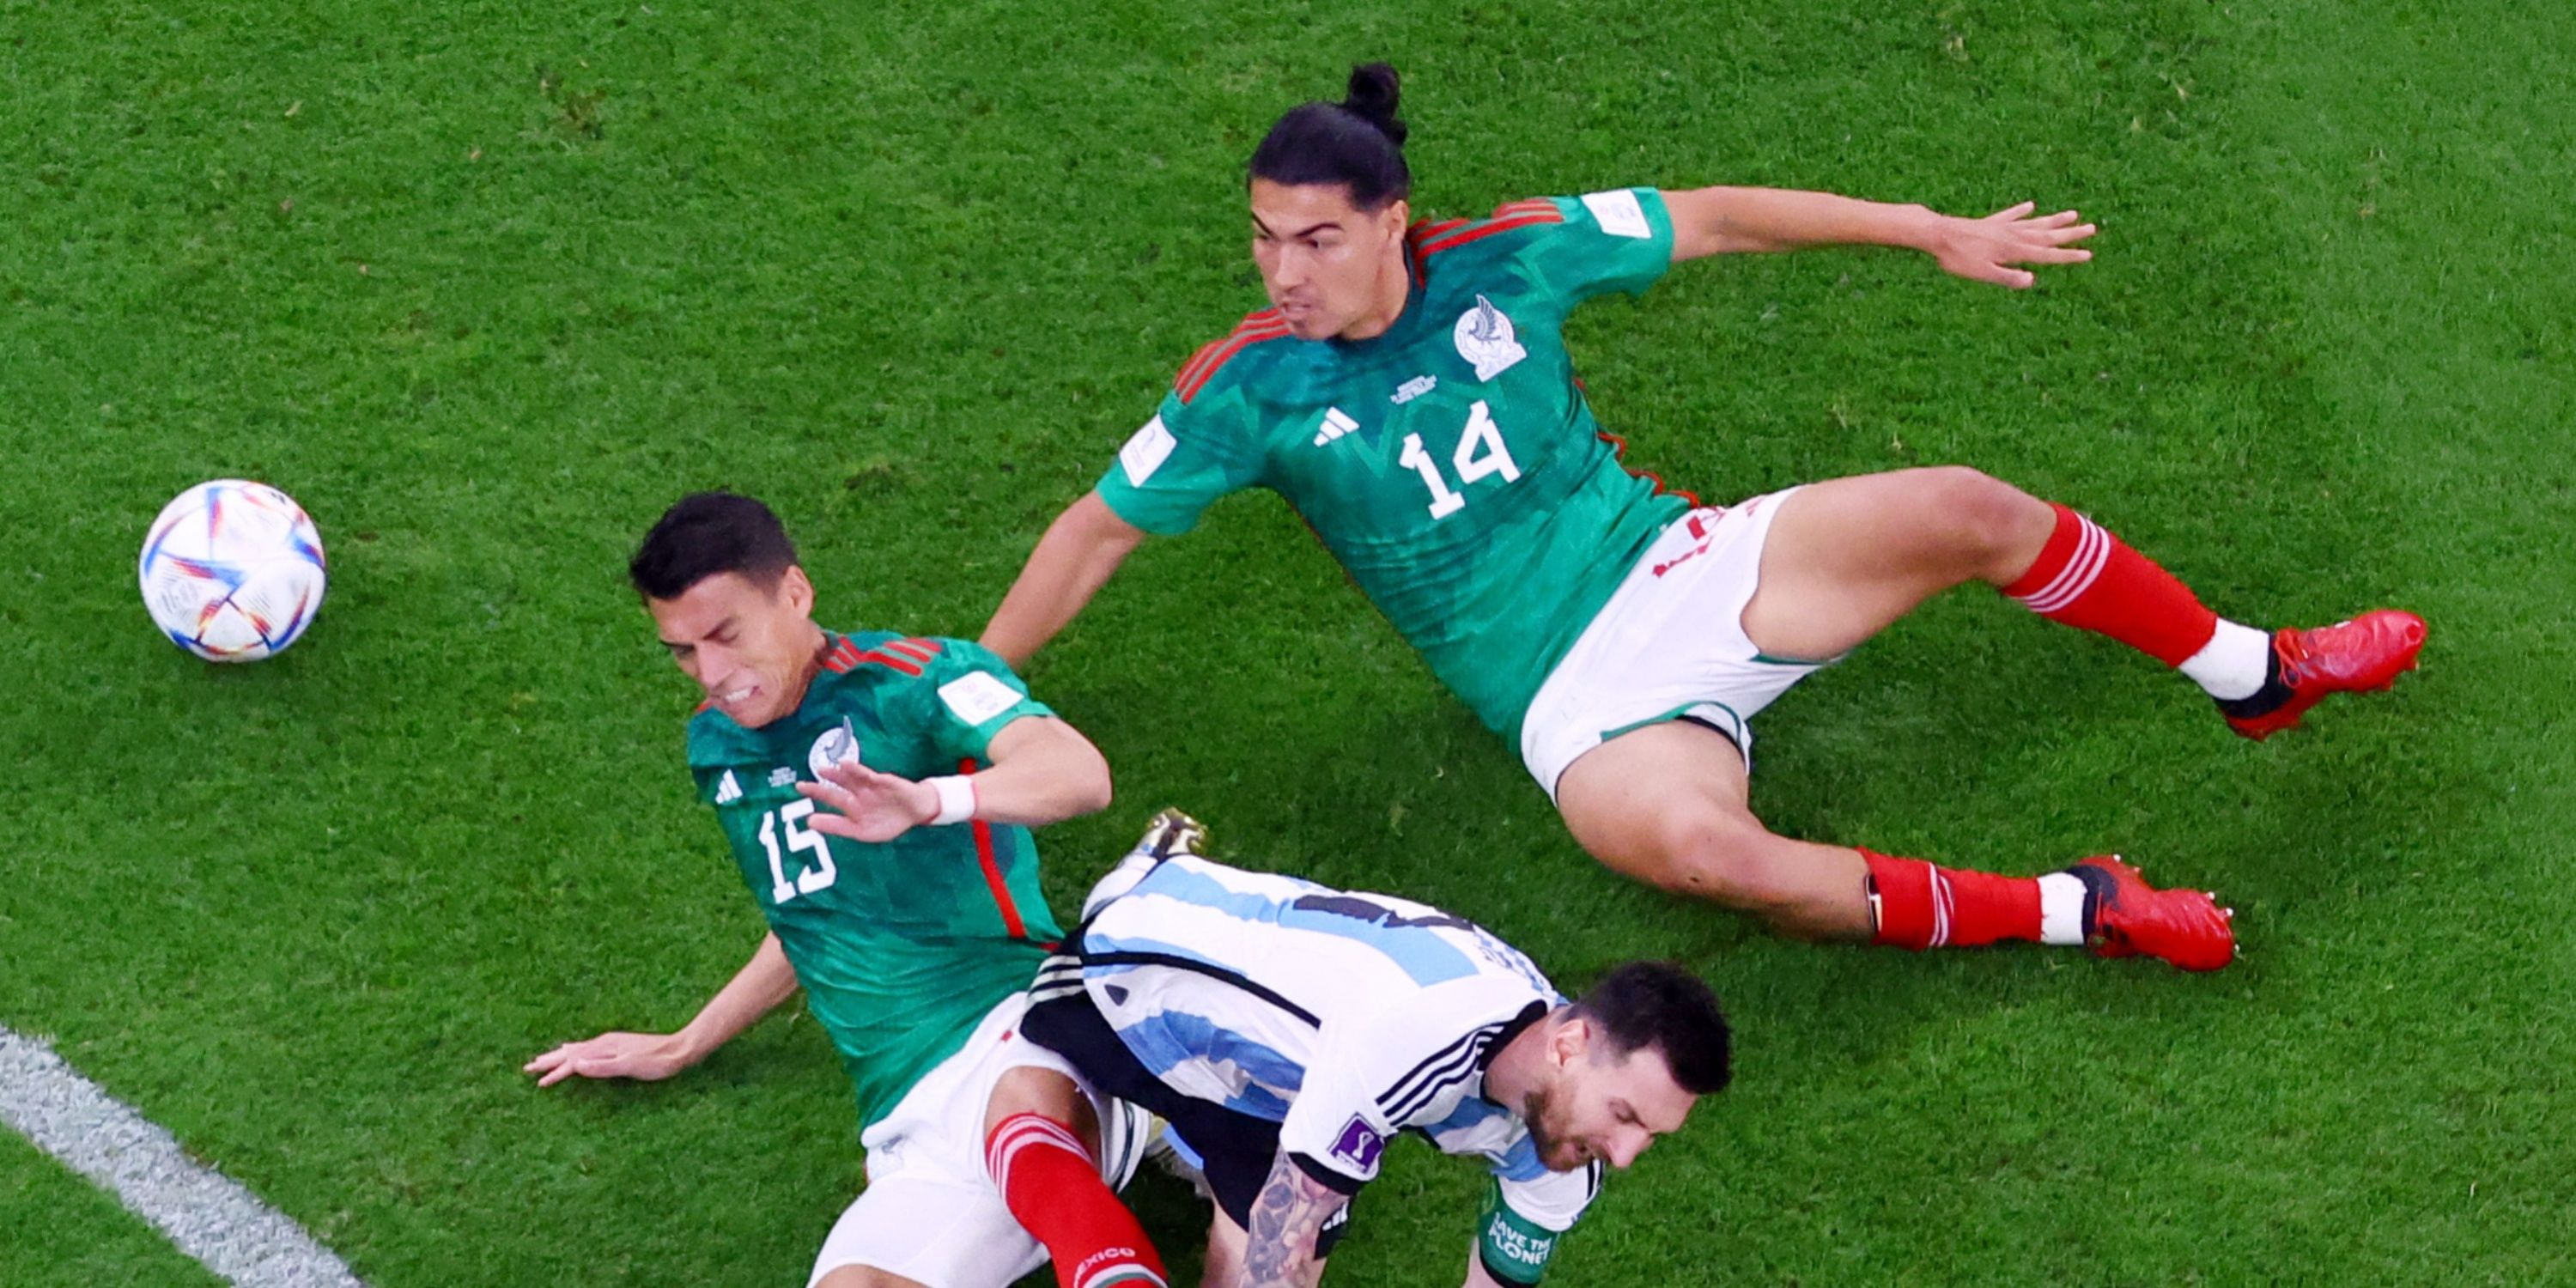 Mexico vs Argentina players at the 2022 World Cup